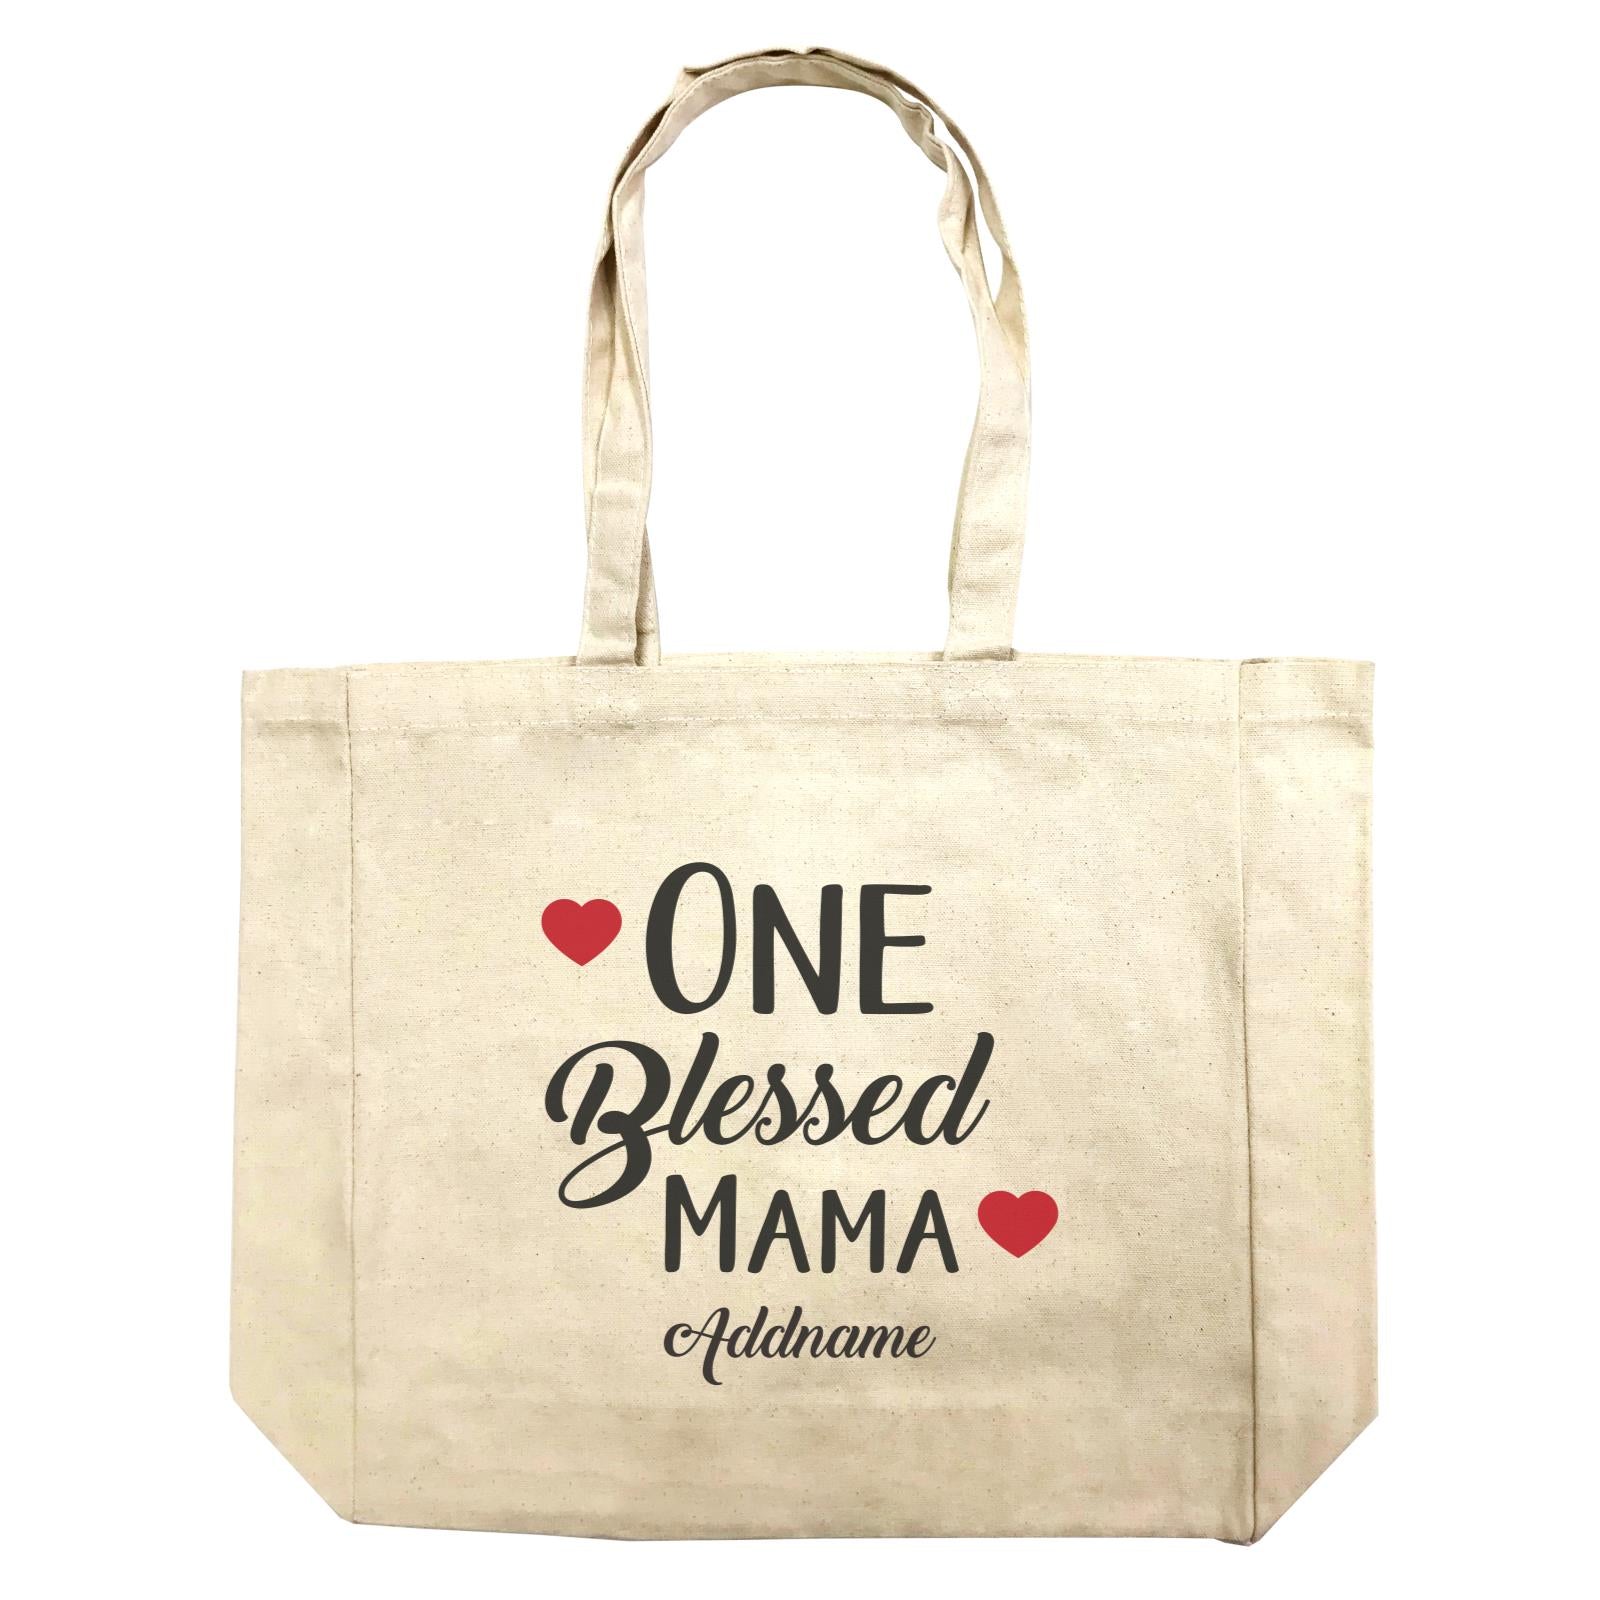 Christian Series One Blessed Mama Addname Shopping Bag